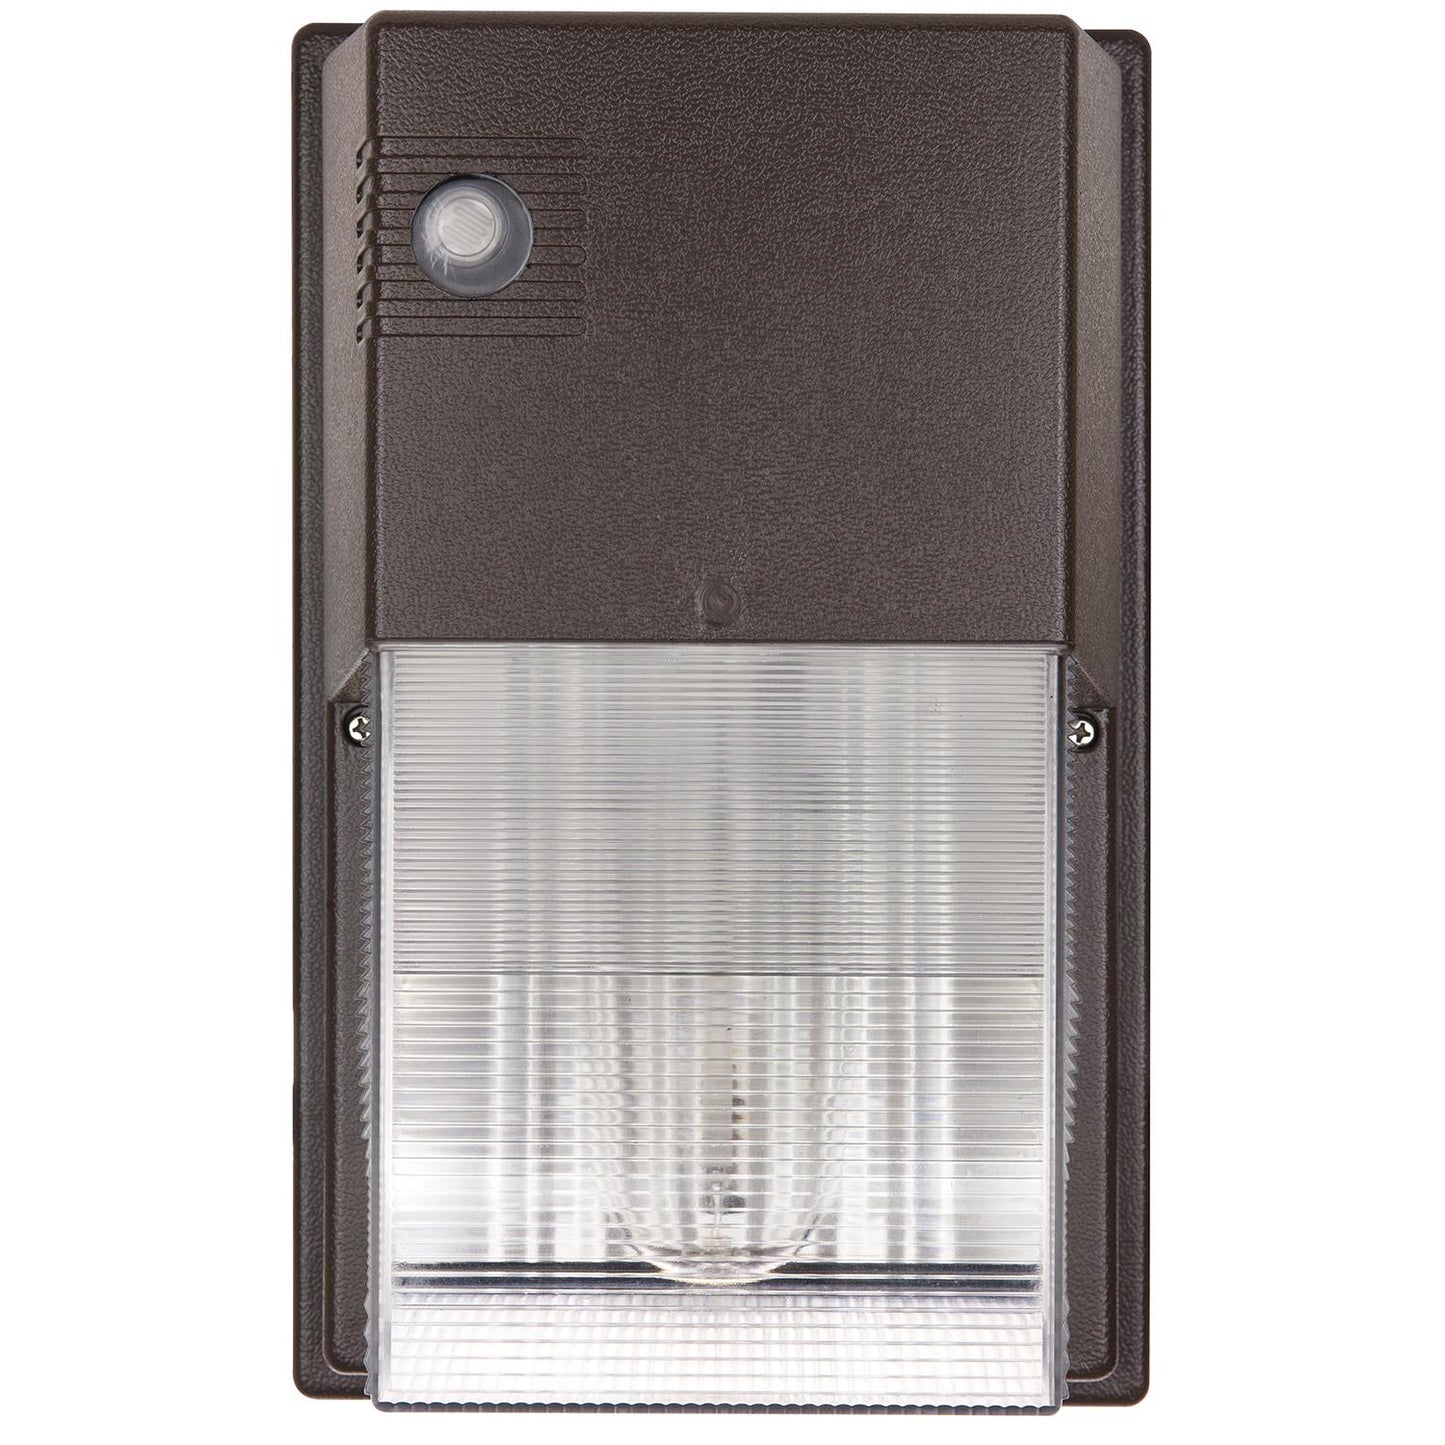 Sunlite 35 Watt High Pressure Sodium Tall Pack Fixture with Photocontrol, Bronze Powder Finish, Clear Polycarbonate Lens